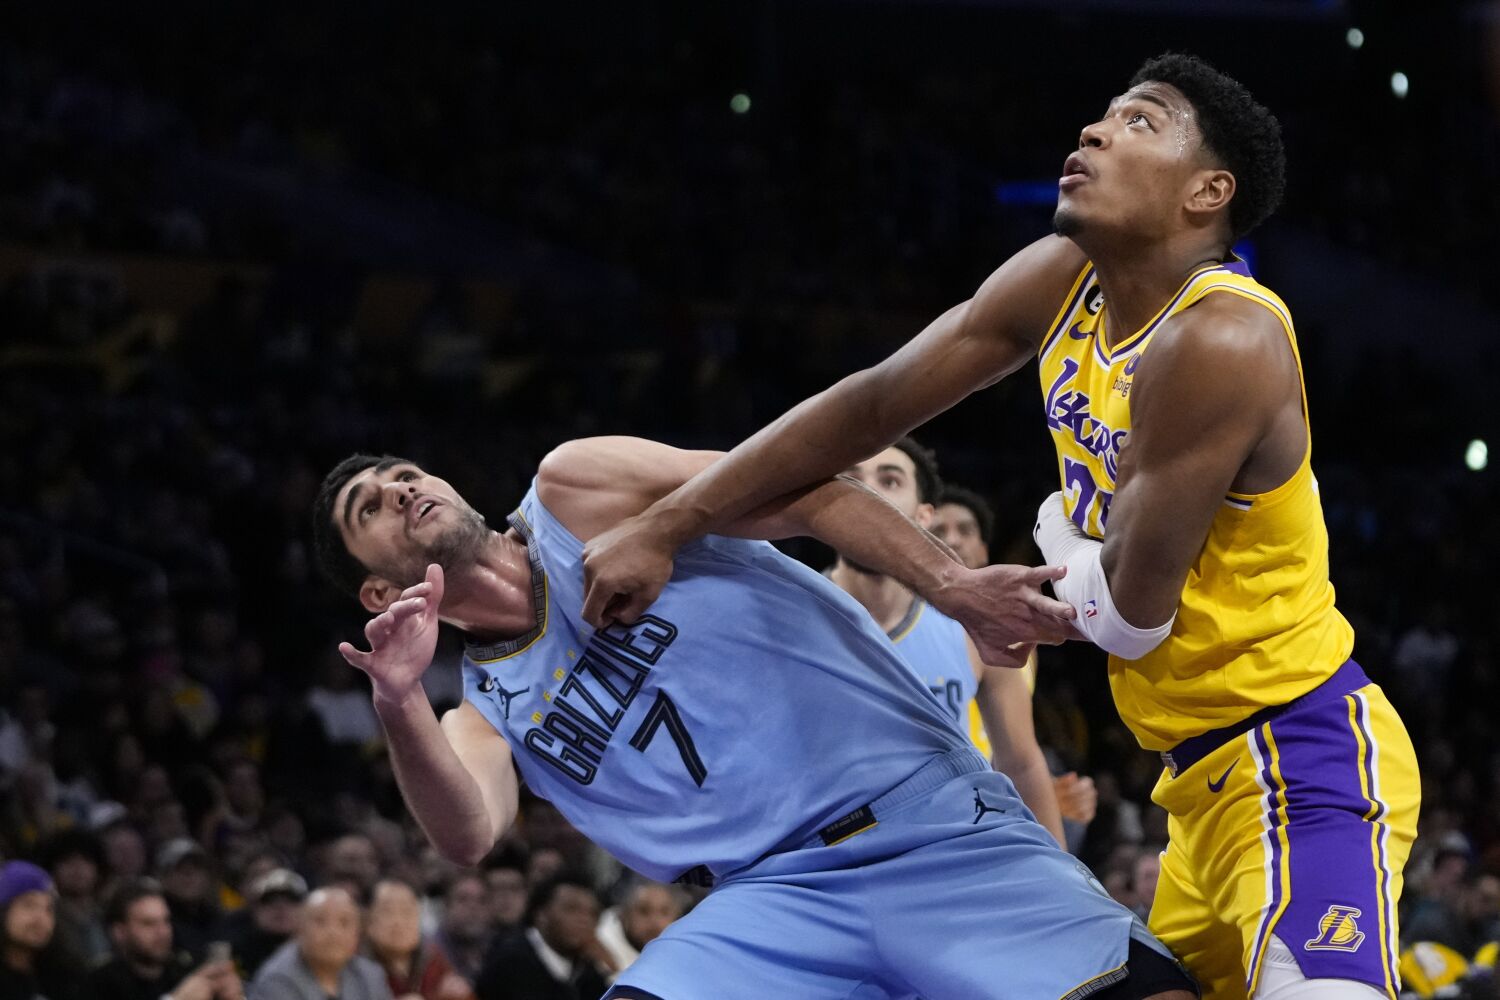 'The physical style': How Rui Hachimura helped Lakers beat the Grizzlies